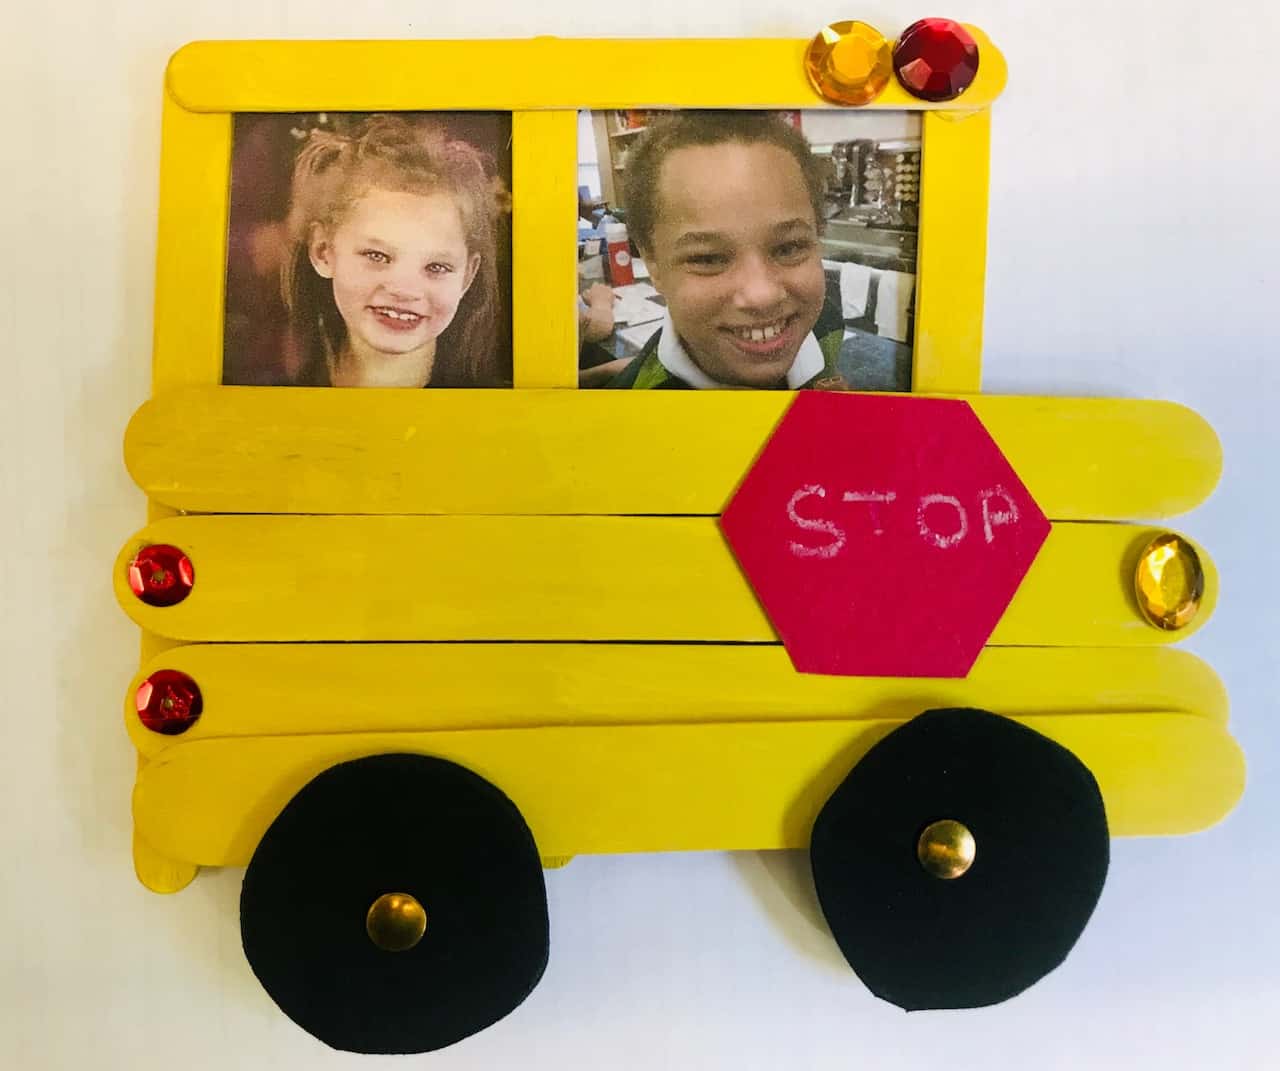 Pictures of Andromeda and Tyrone Sea were placed inside the popsicle stick school bus Tyrone made in class. (photo courtesy of the Summers County School District Transportation Department) 